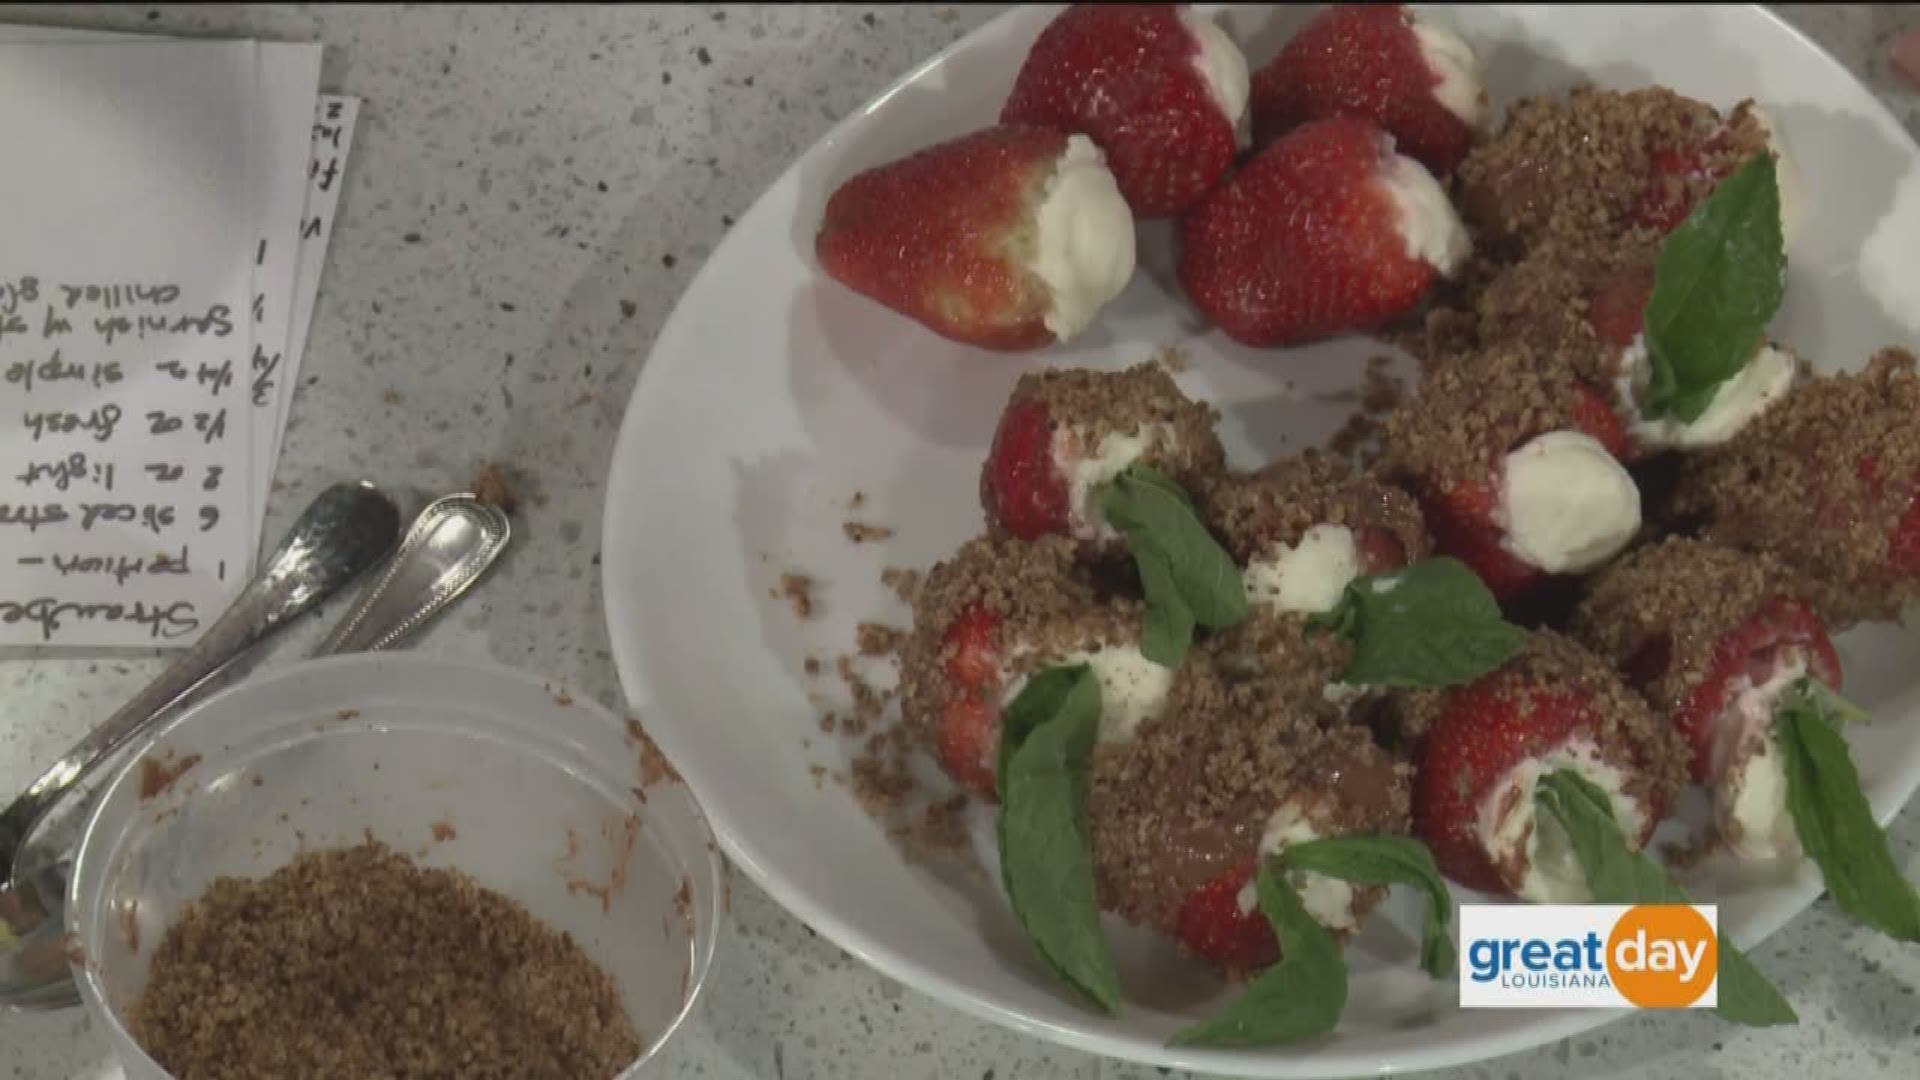 NOLA Grandmas Anne and Harriet are back in the kitchen making pecan and chocolate-encrusted stuffed strawberries paired with a classic strawberry daiquiri.